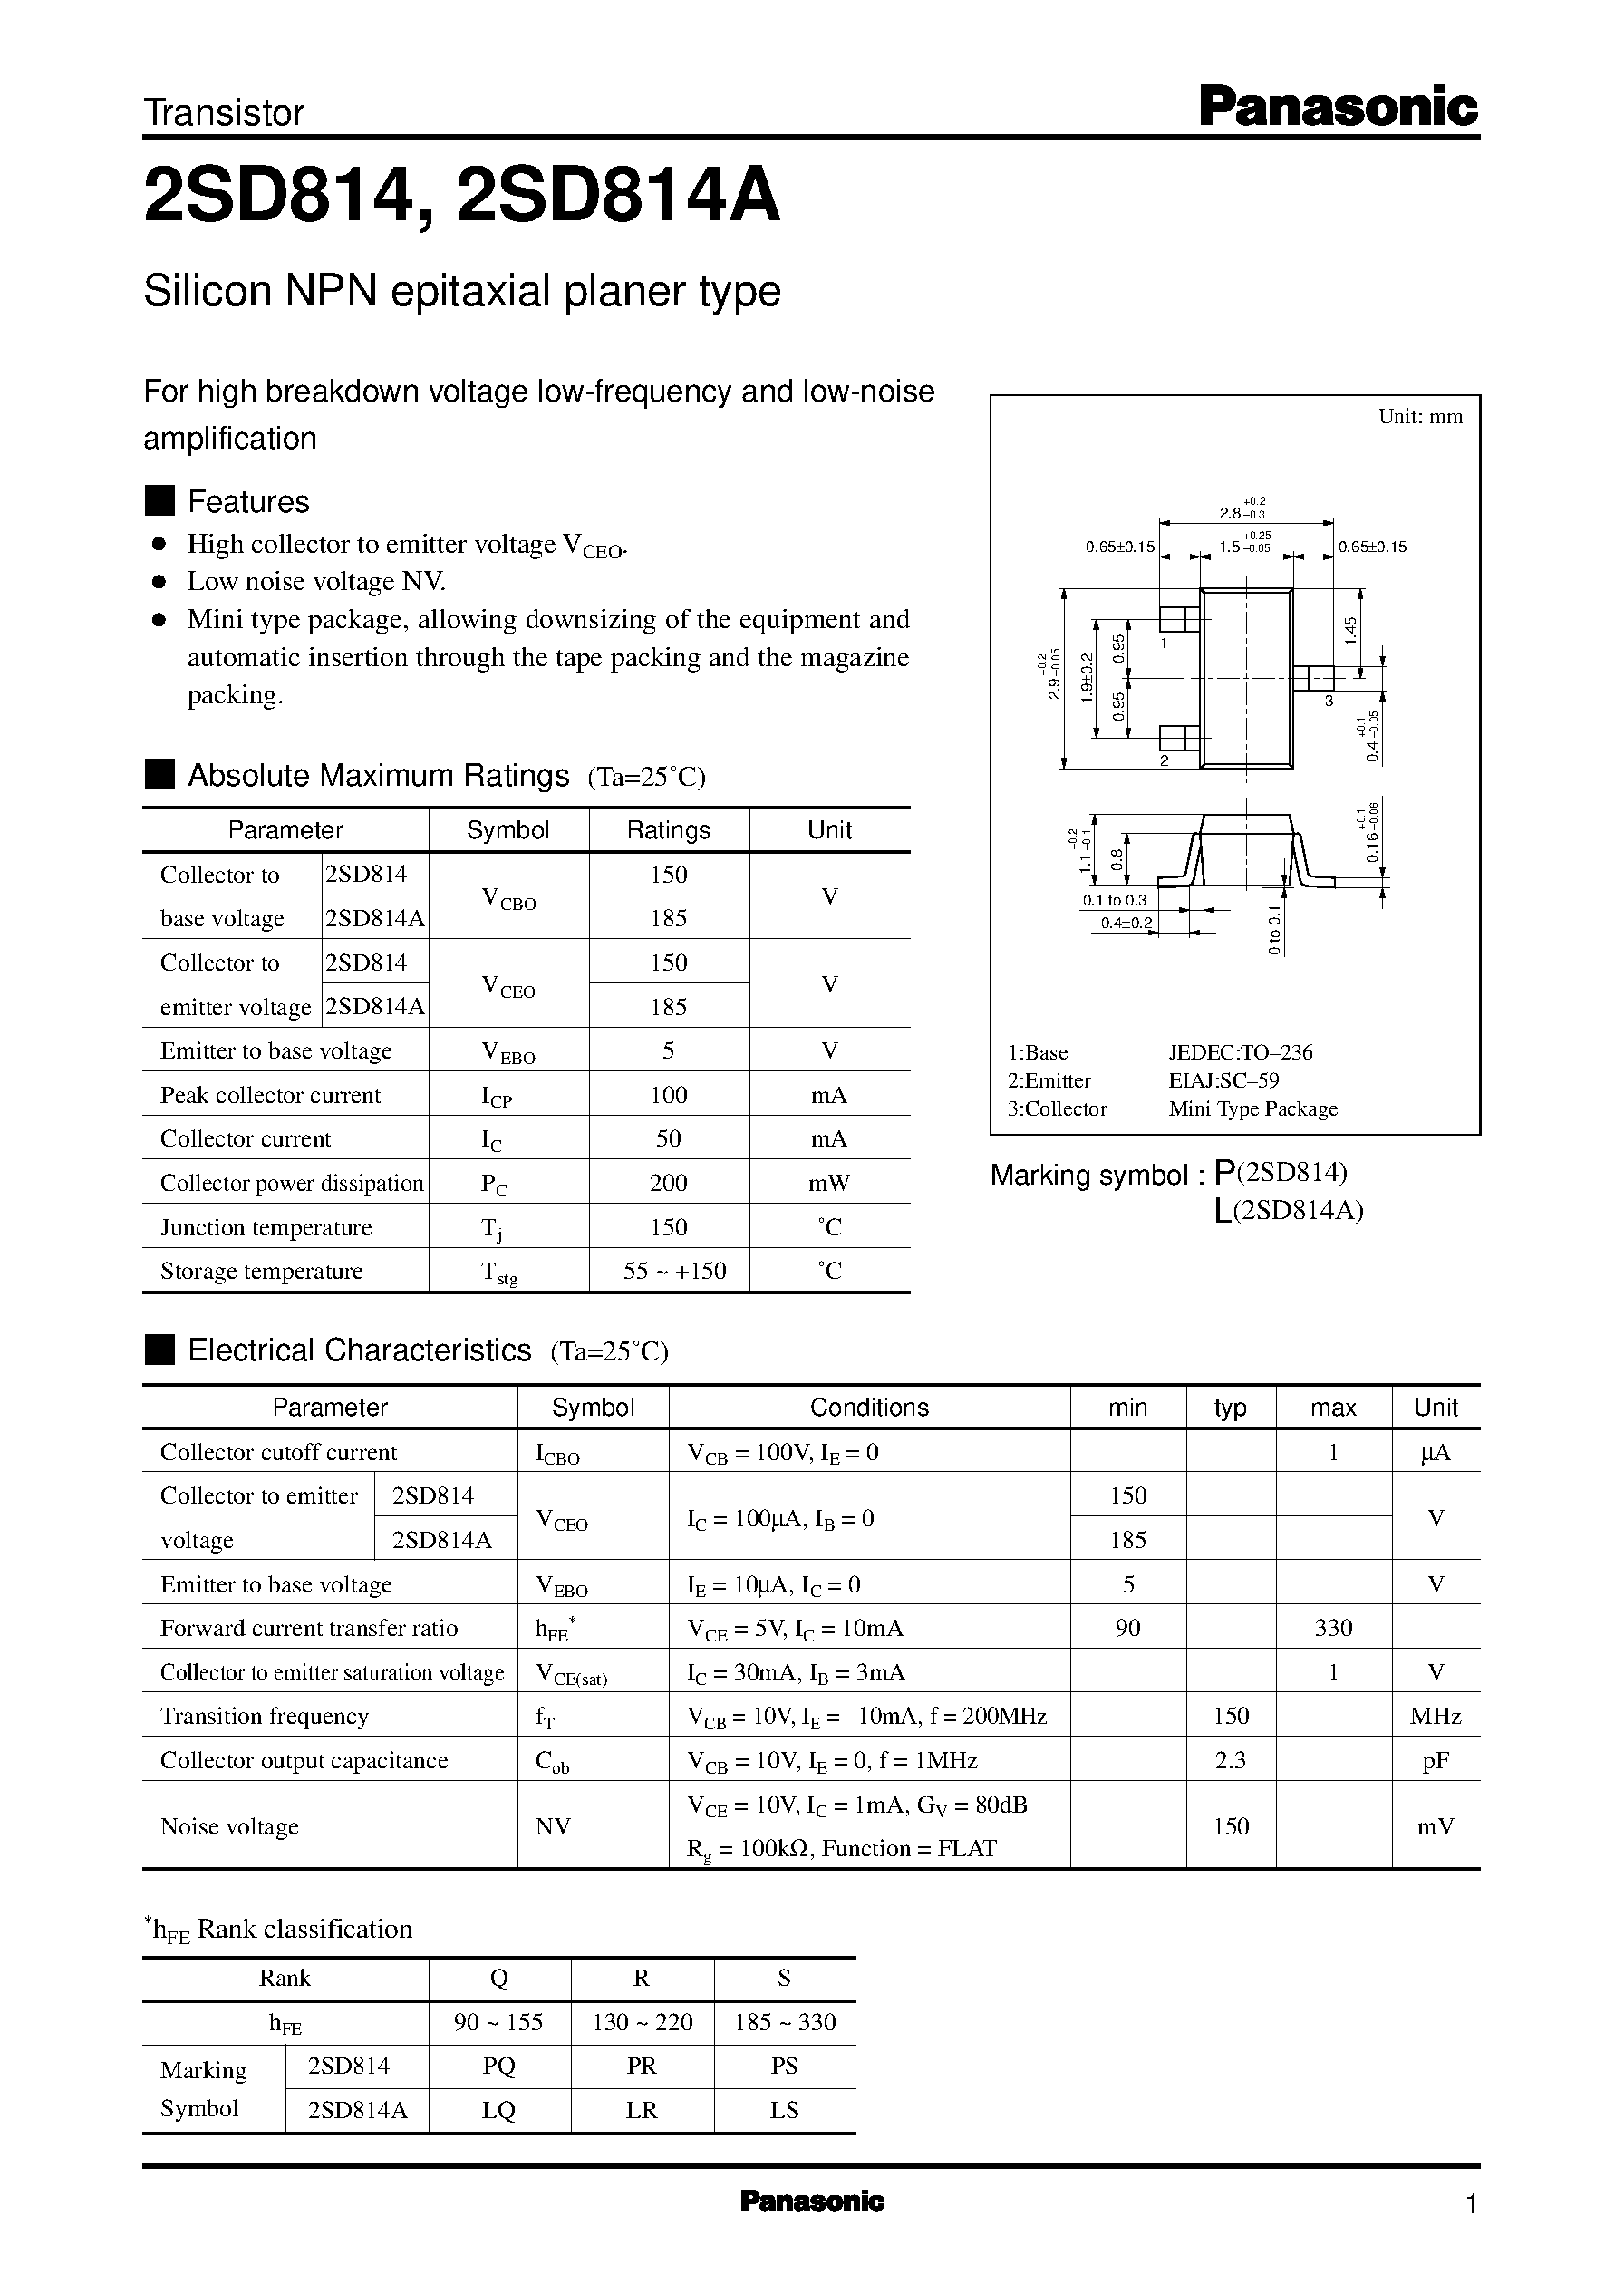 Datasheet 2SD0814 - Silicon NPN epitaxial planer type(For high breakdown voltage low-frequency and low-noise amplification) page 1